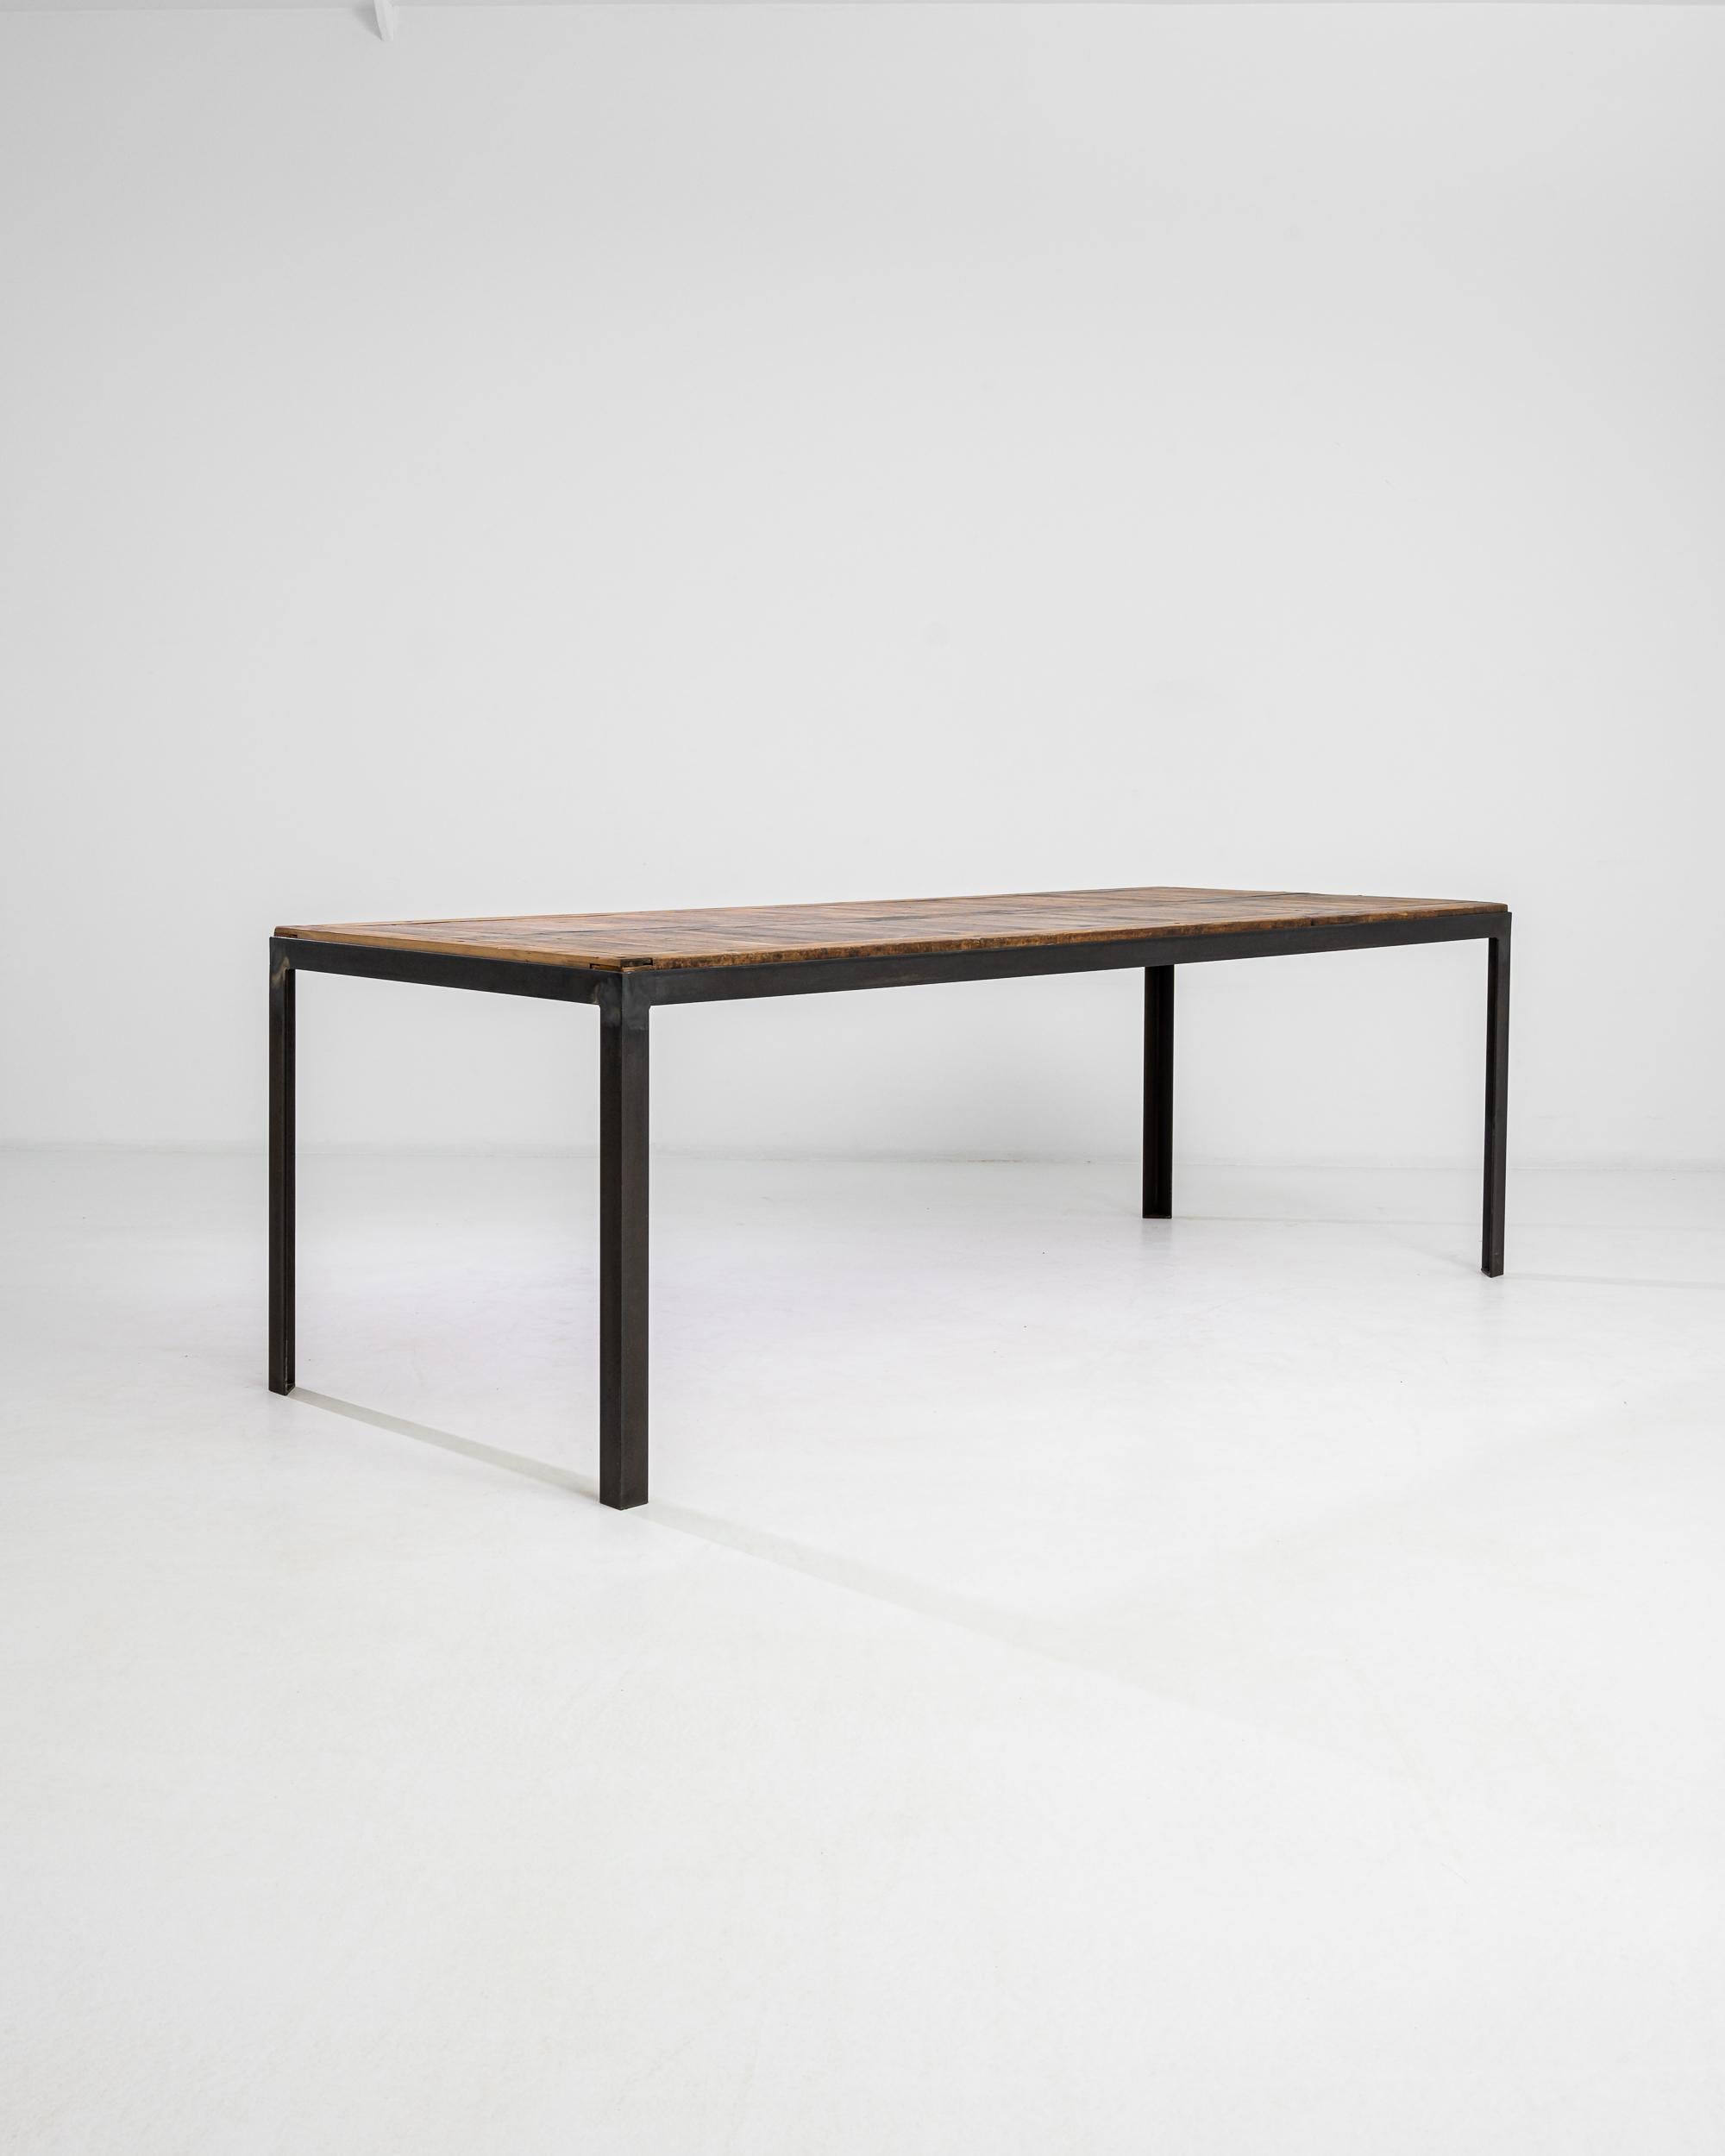 Composed with 20th century architectural salvage from France, this table boasts an industrial steel frame that elevates a wooden table top. The texture and color of the wooden surface enhance the minimal aesthetic of the black-patinated metal base.